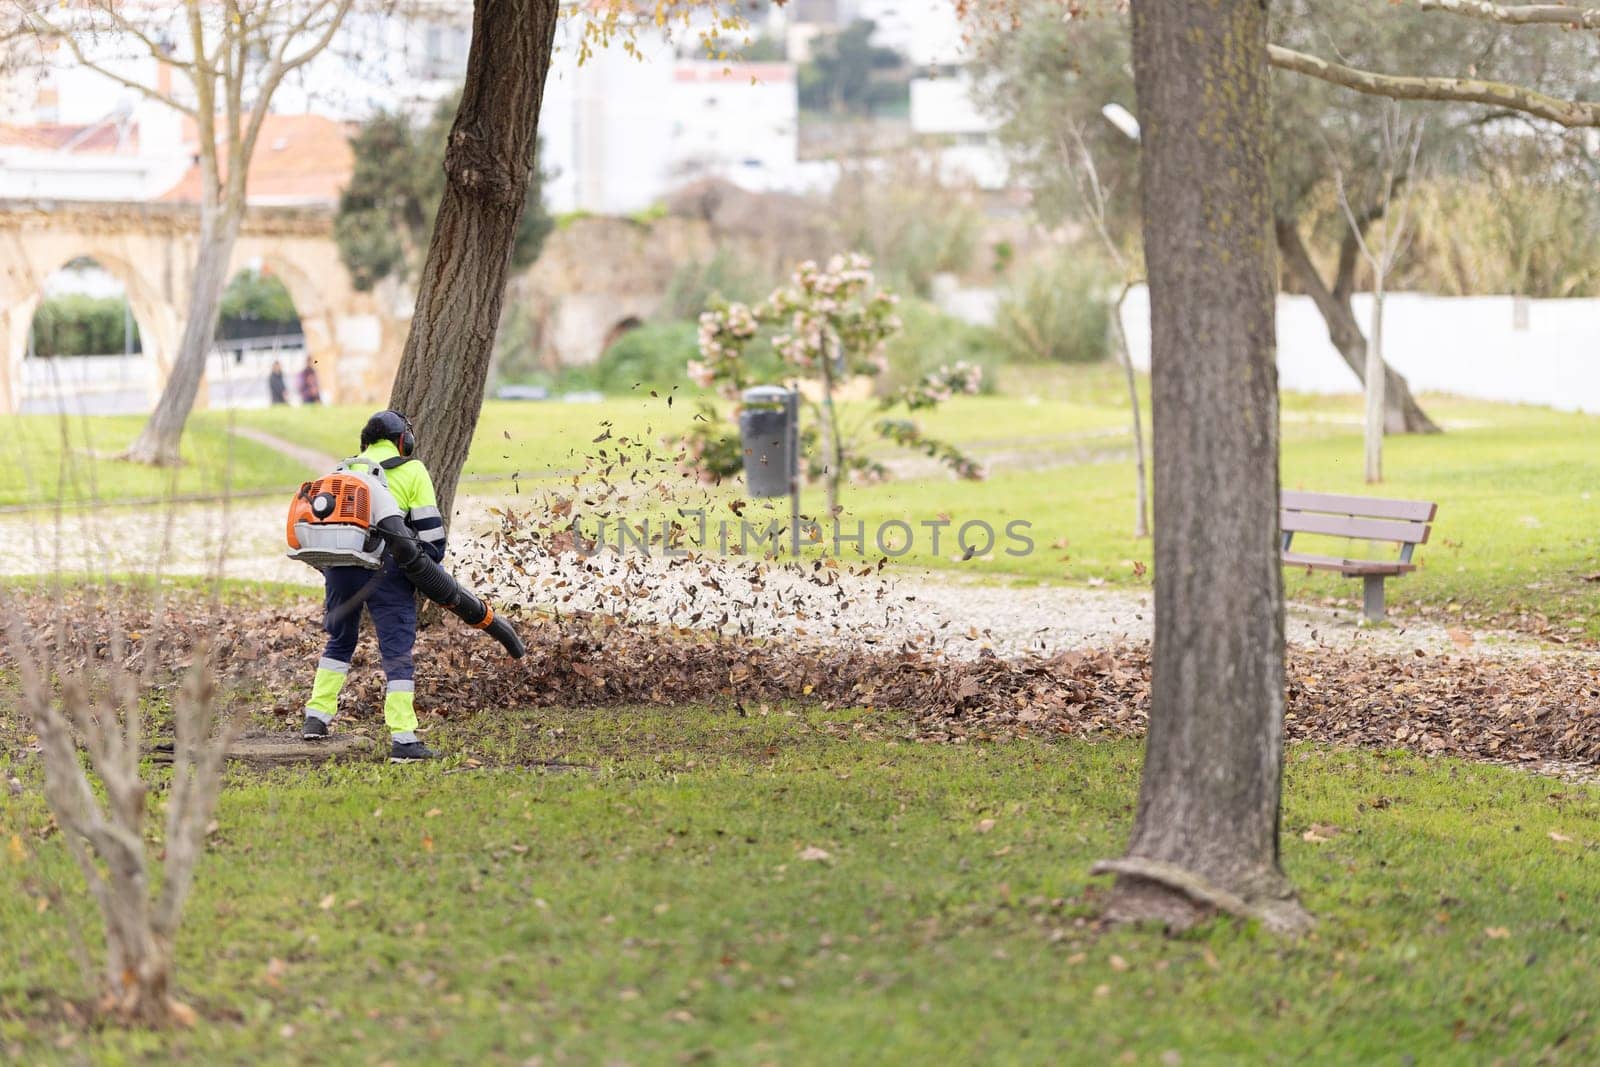 A wirker is blowing leaves with a leaf blower in a park. The leaves are scattered all over the ground, and the man is working hard to clear them. The scene is peaceful and serene